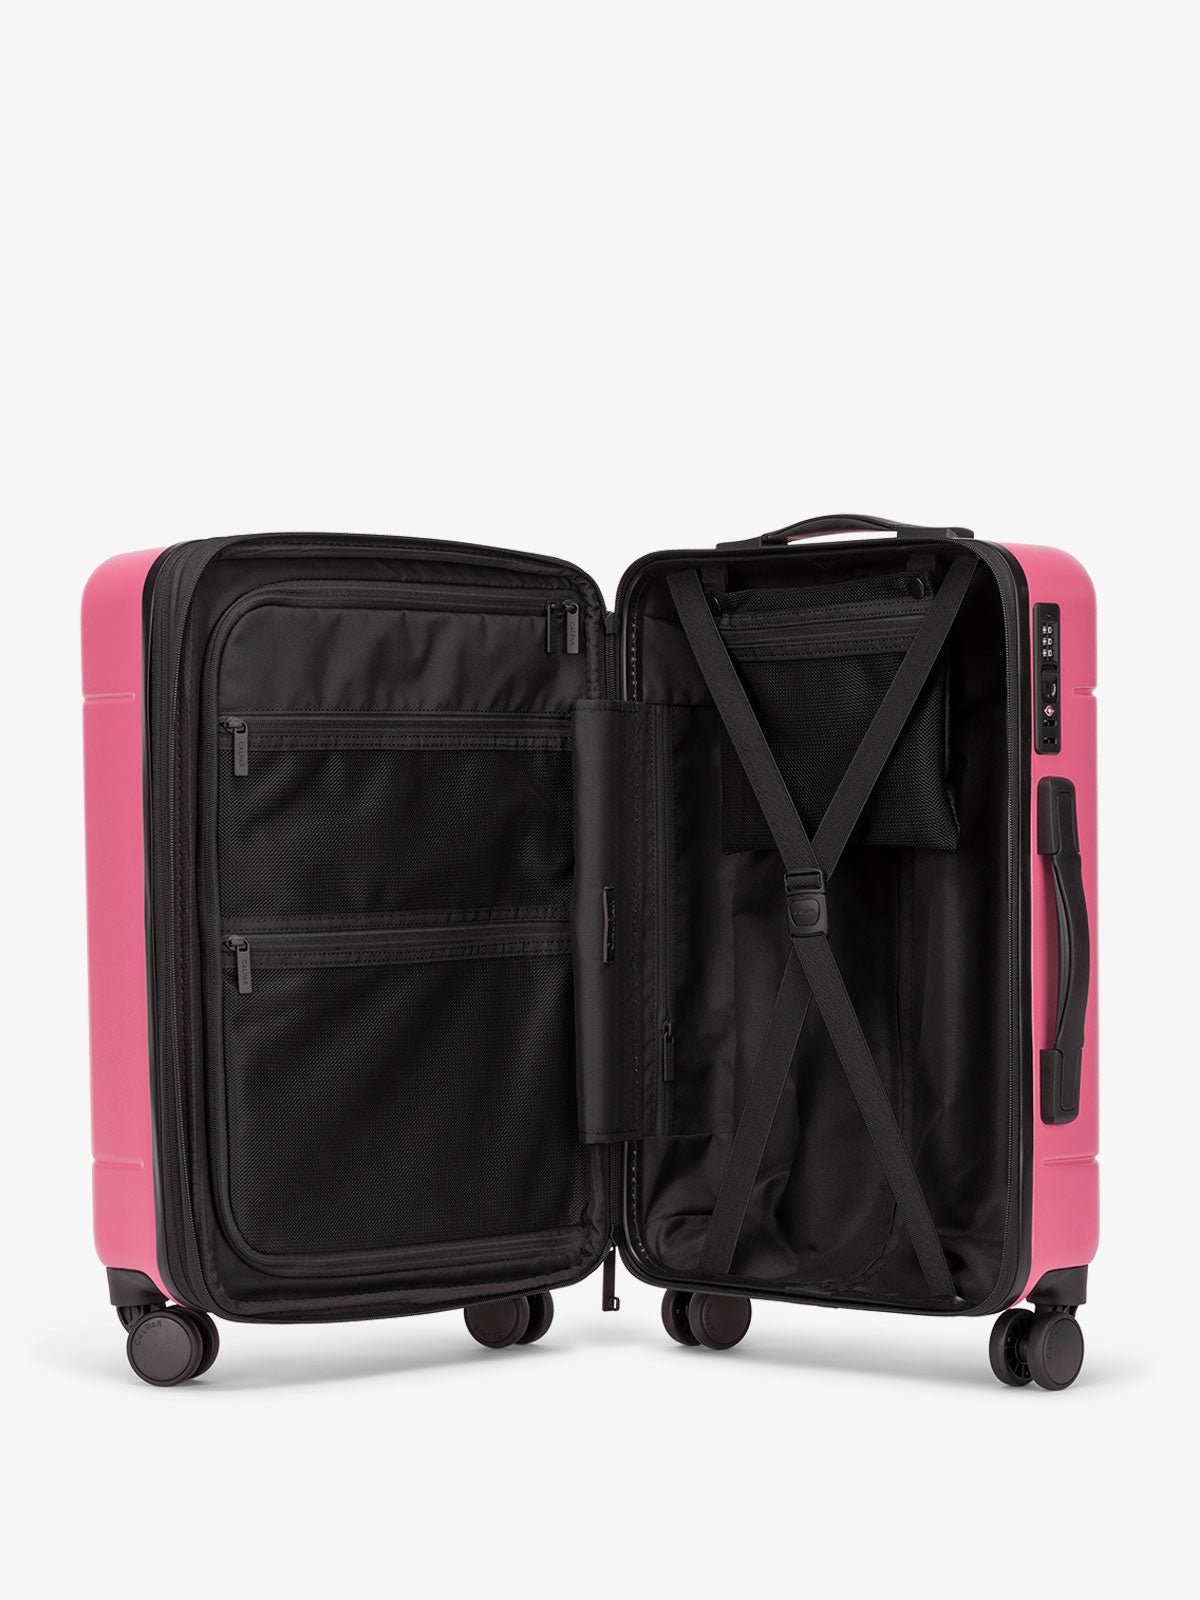 Interior of Hue rolling carry-on suitcase in hot pink dragonfruit